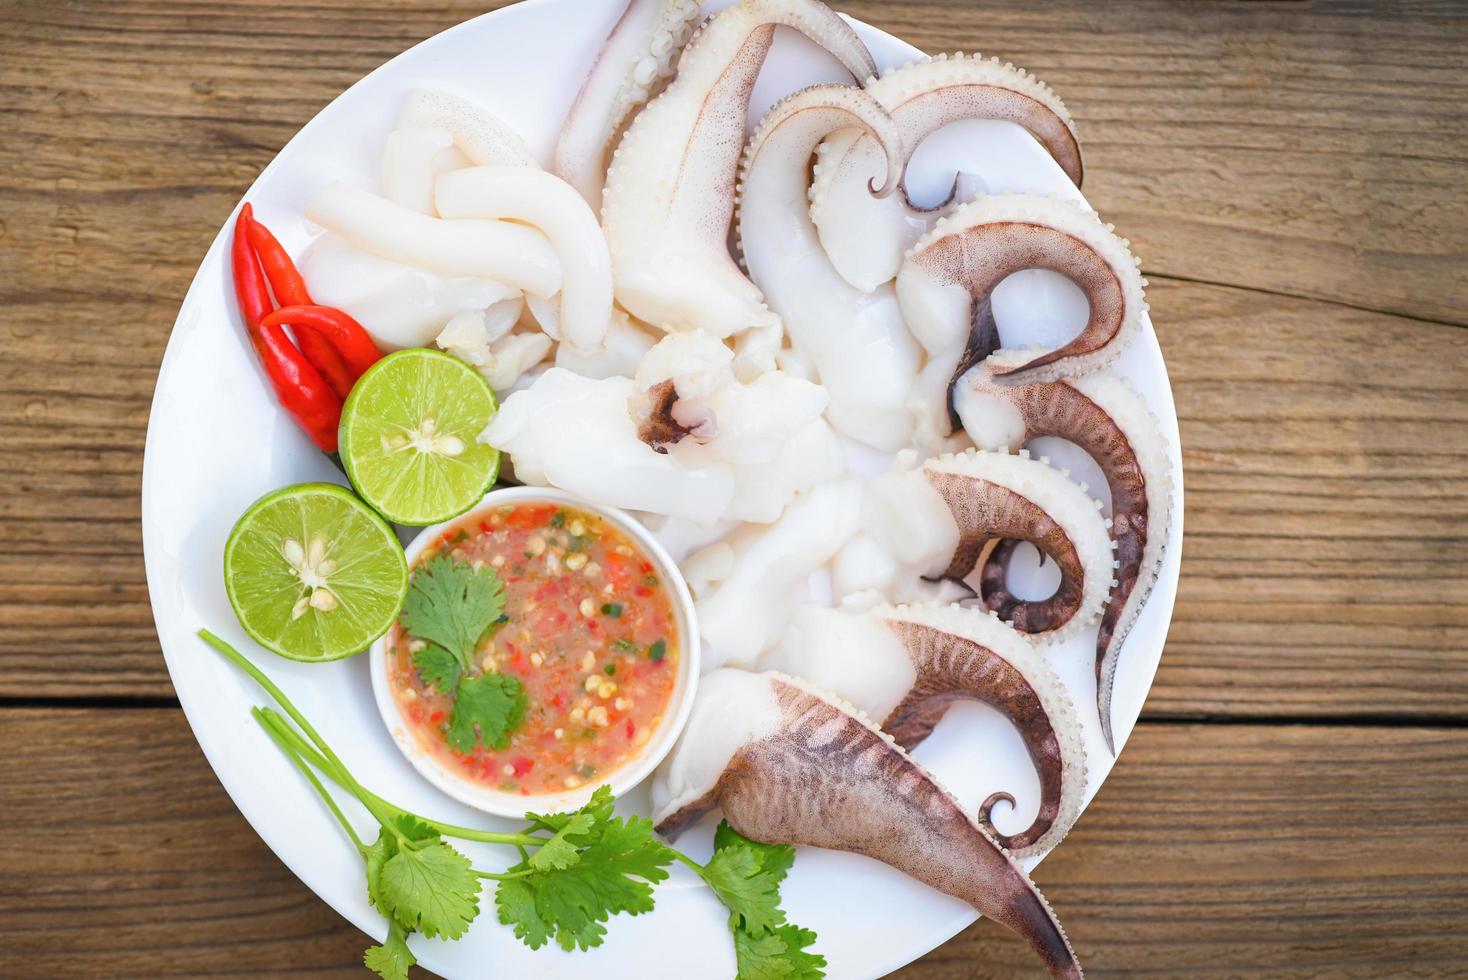 seafood plate squid food on white plate, Fresh squid cooked boiled steam with vegetable salad lemon lime and seafood sauce chili sauce serve on table, octopus tentacles cuttlefish ocean gourmet photo